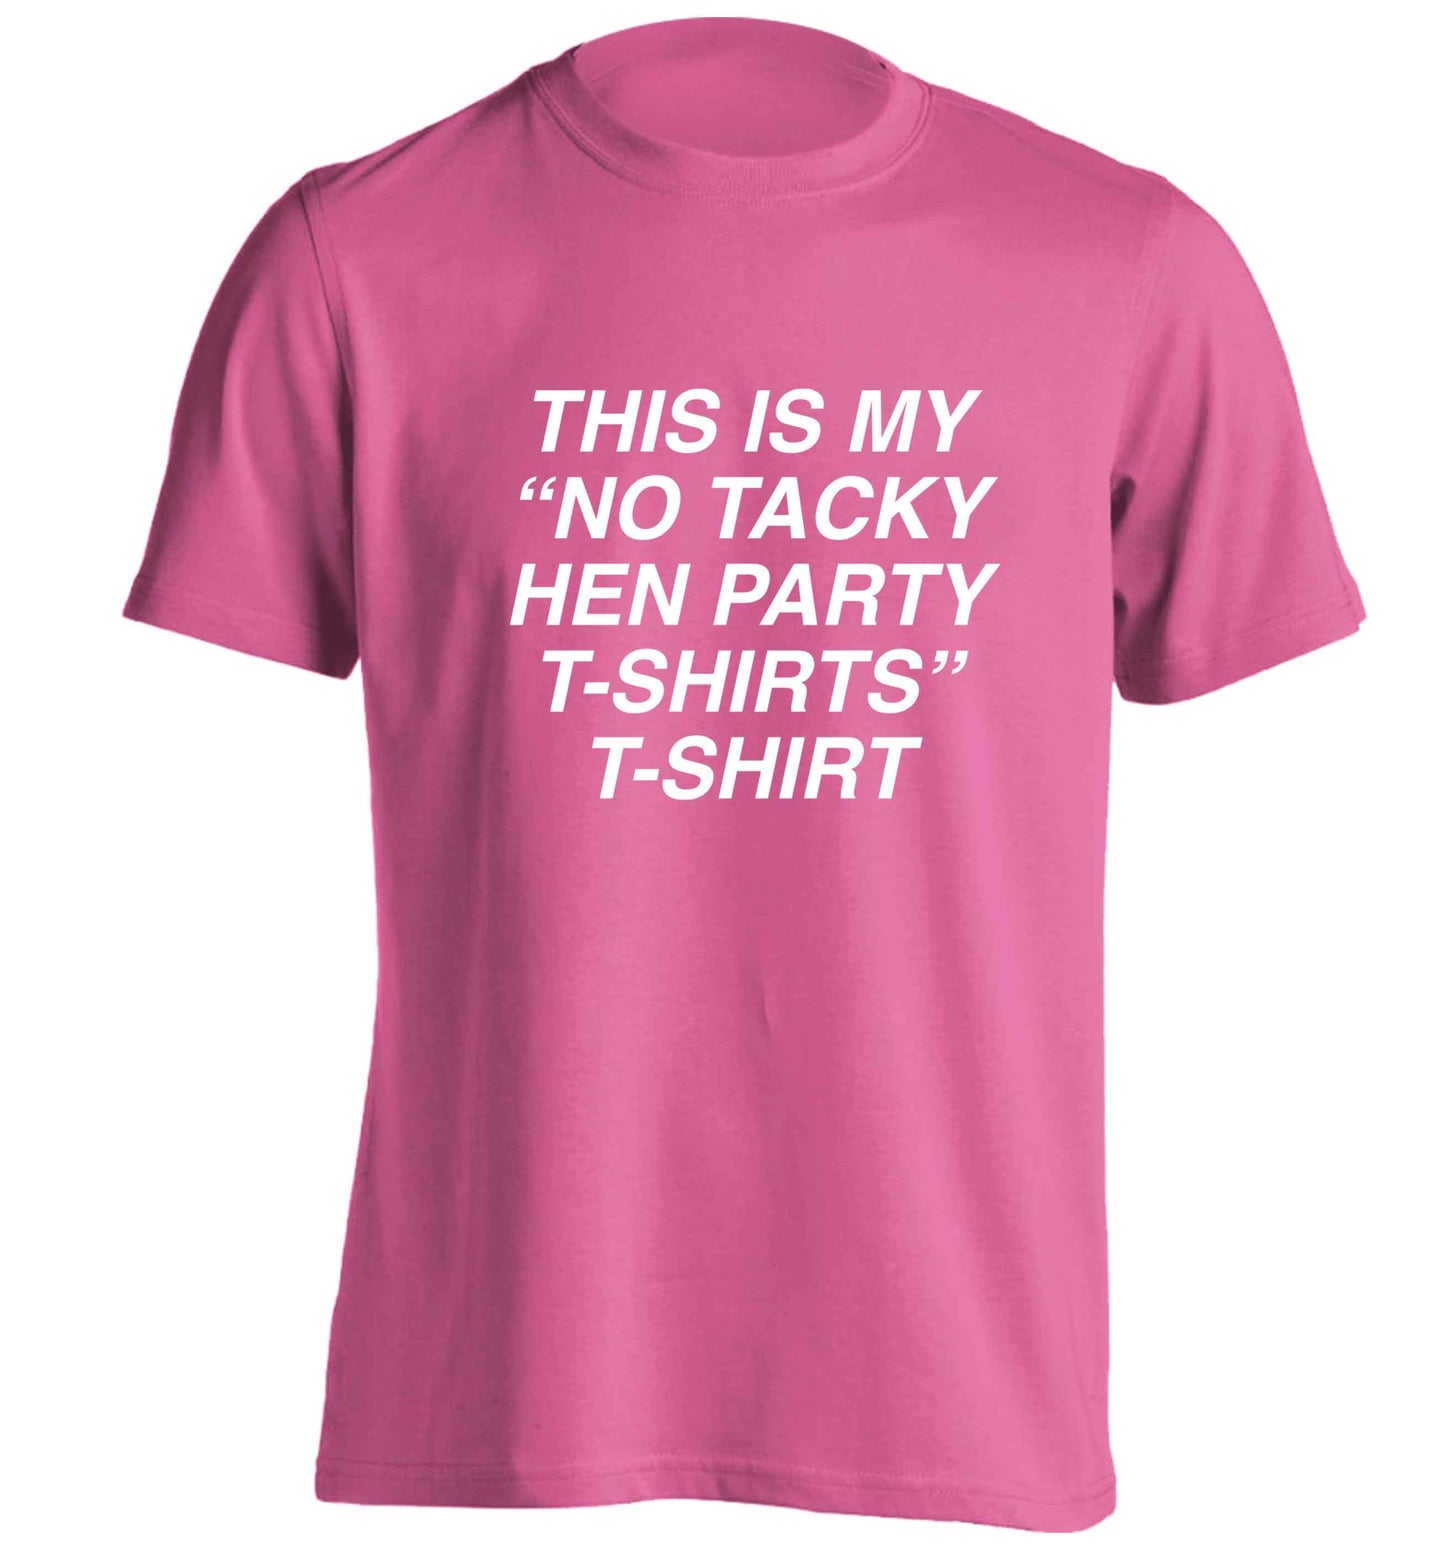 This is my 'no tacky hen party T-Shirt'  adults unisex pink Tshirt 2XL